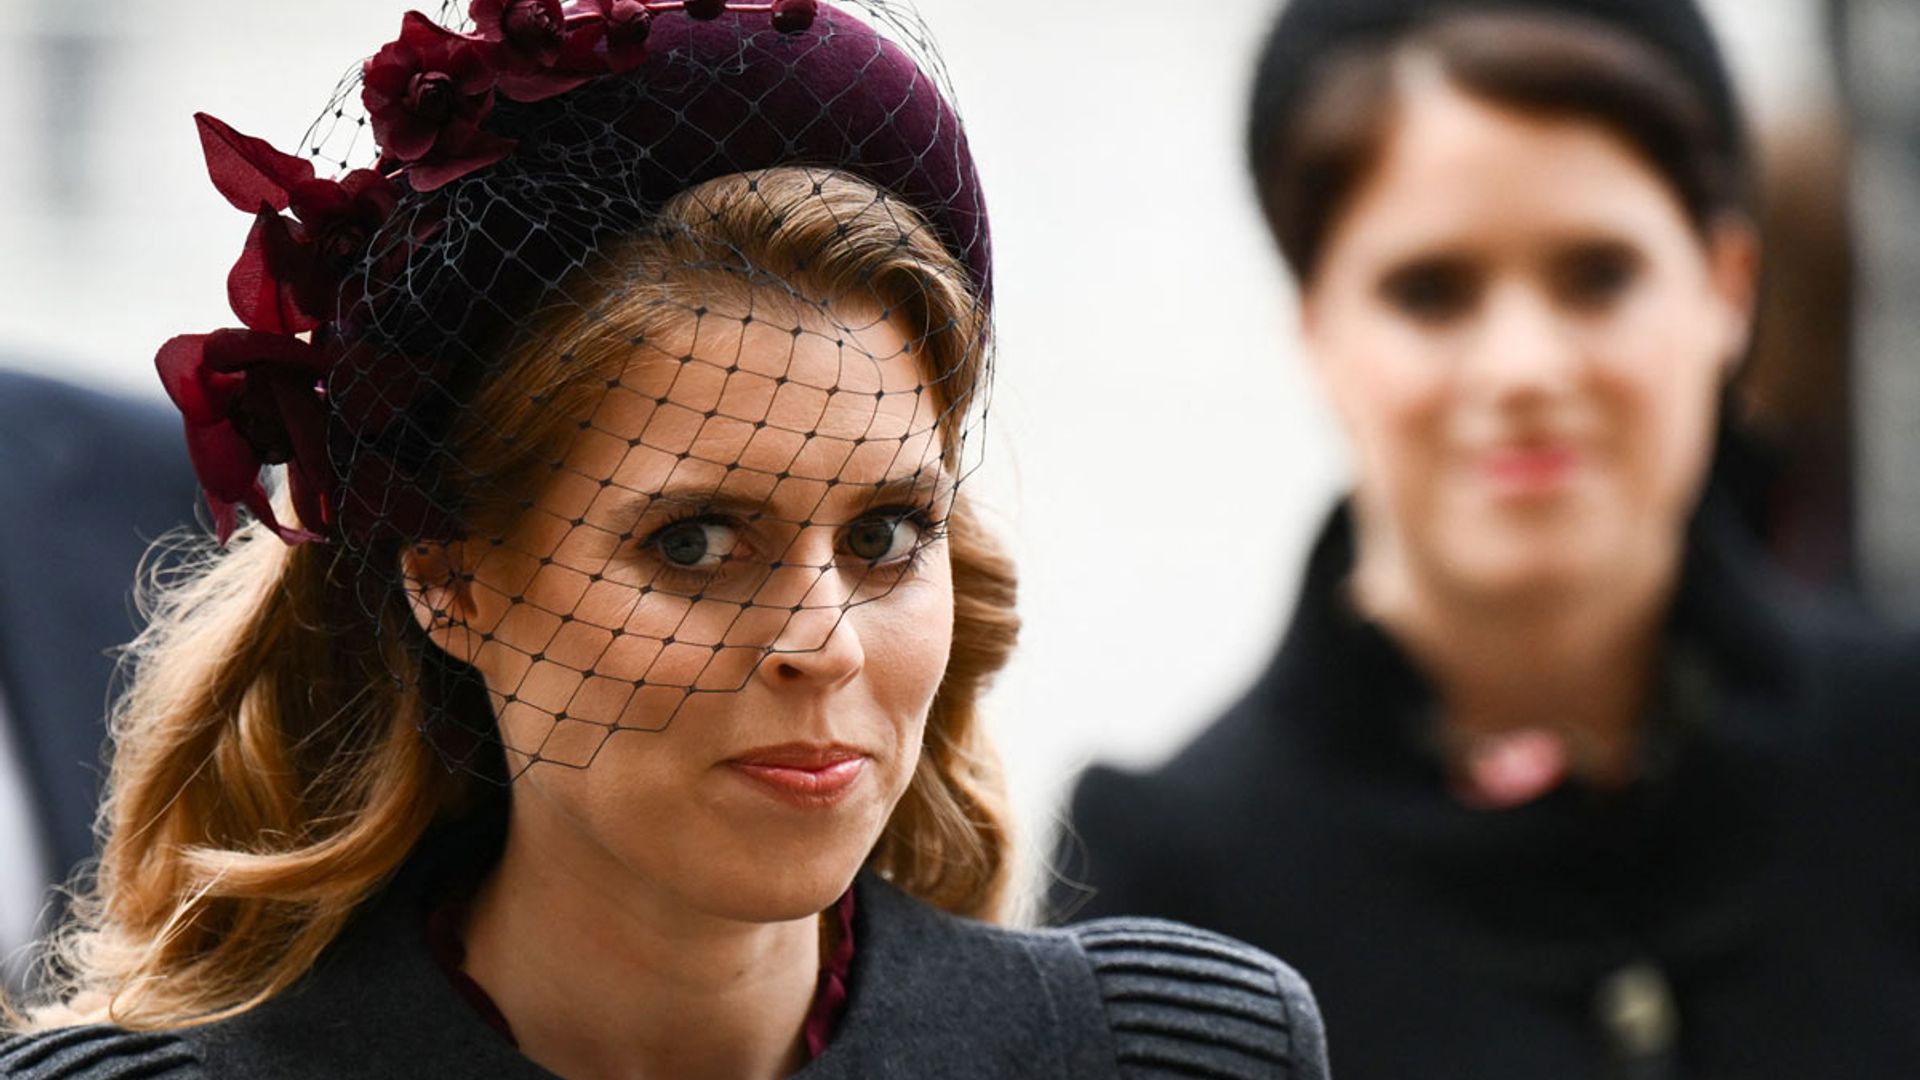 Princess Beatrice looks regal and radiant in fitted coat dress at Prince Philip's service